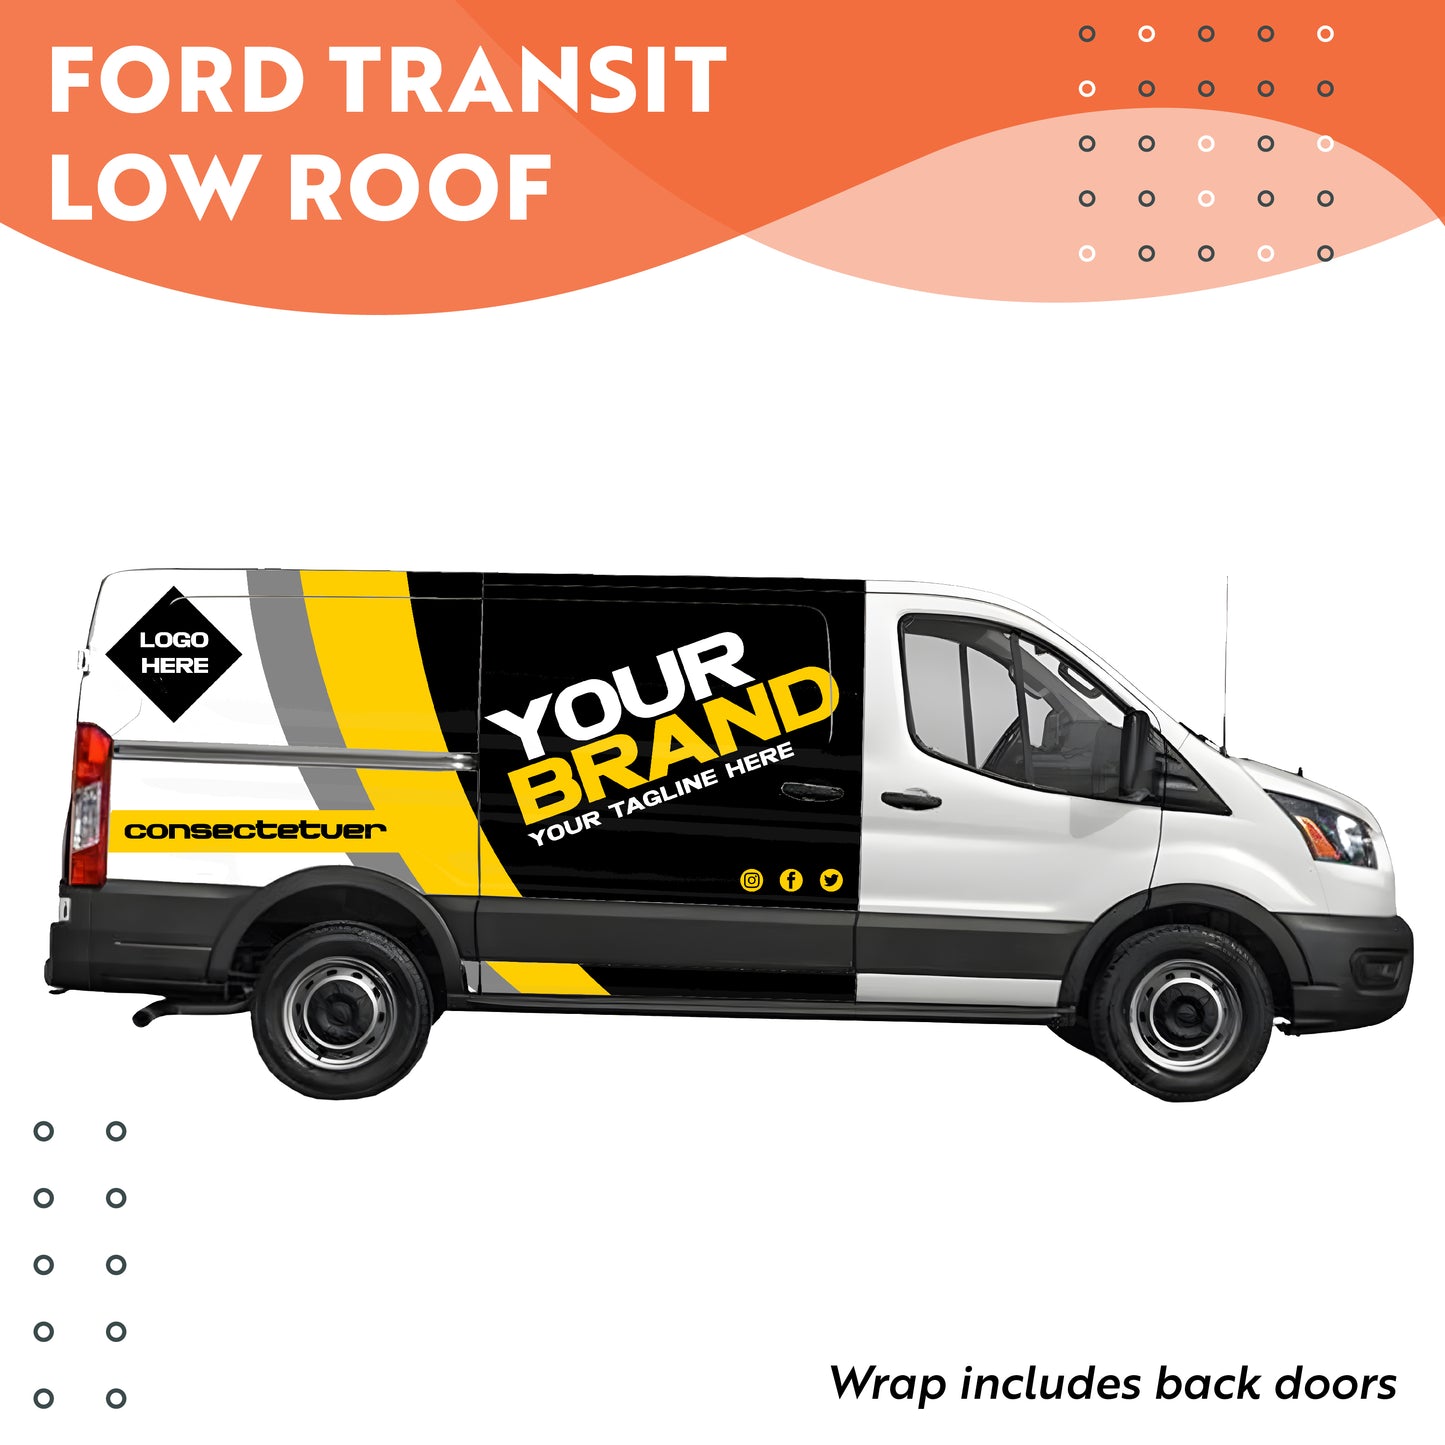 FORD TRANSIT Low Roof